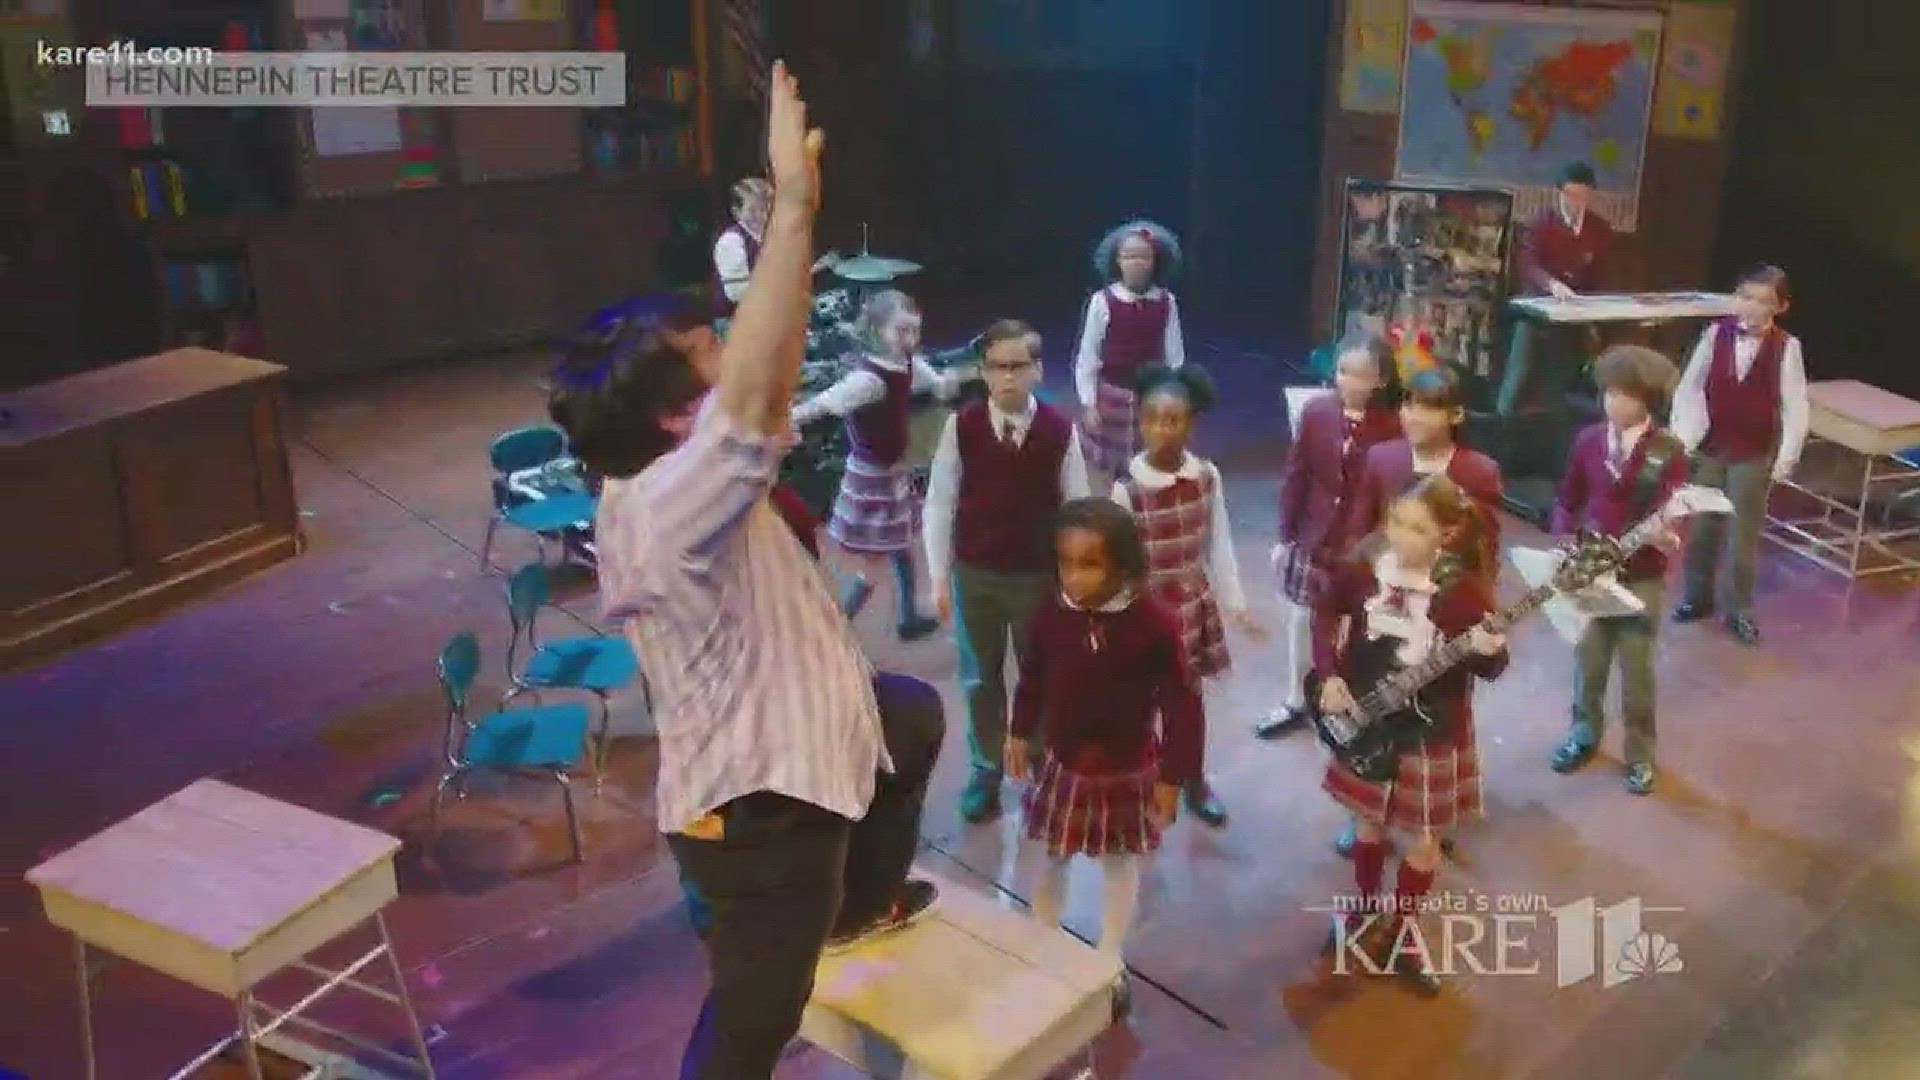 'School of Rock - The Musical' rocks the stage at the Orpheum Theatre in Minneapolis from March 6-11. http://kare11.tv/2He4flE